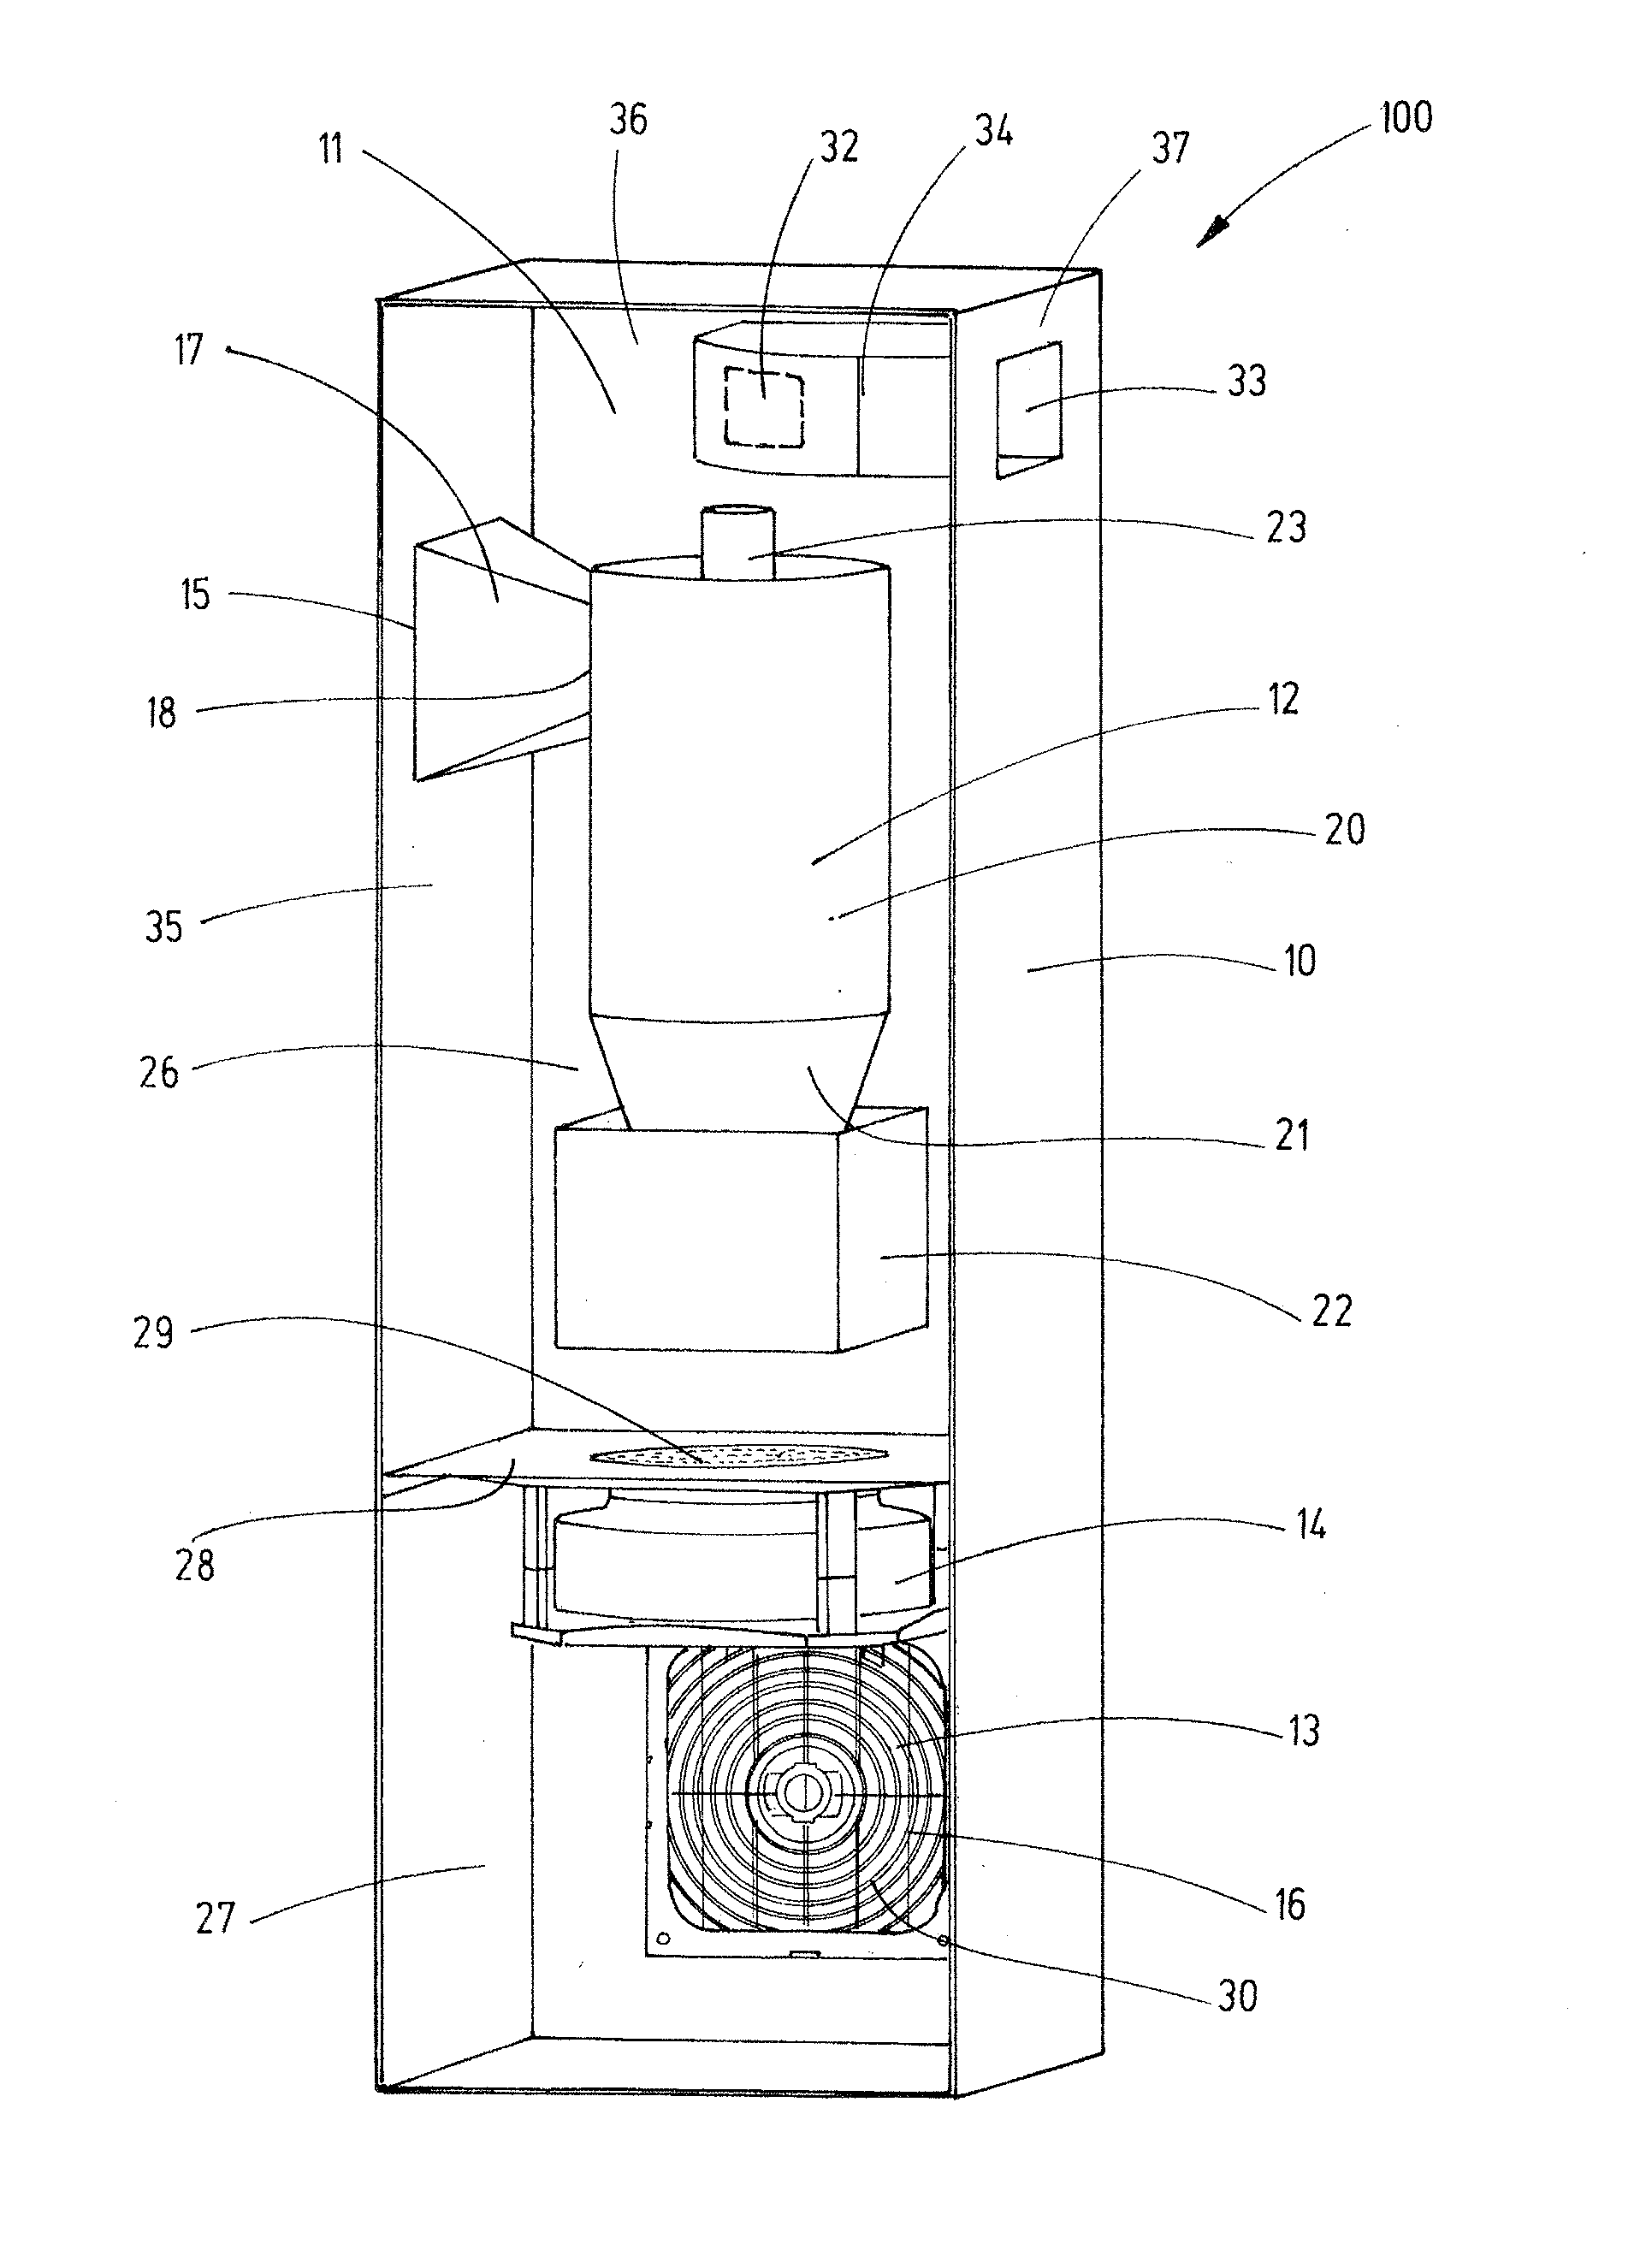 Air passage device for admitting purified air into an interior of a control cabinet